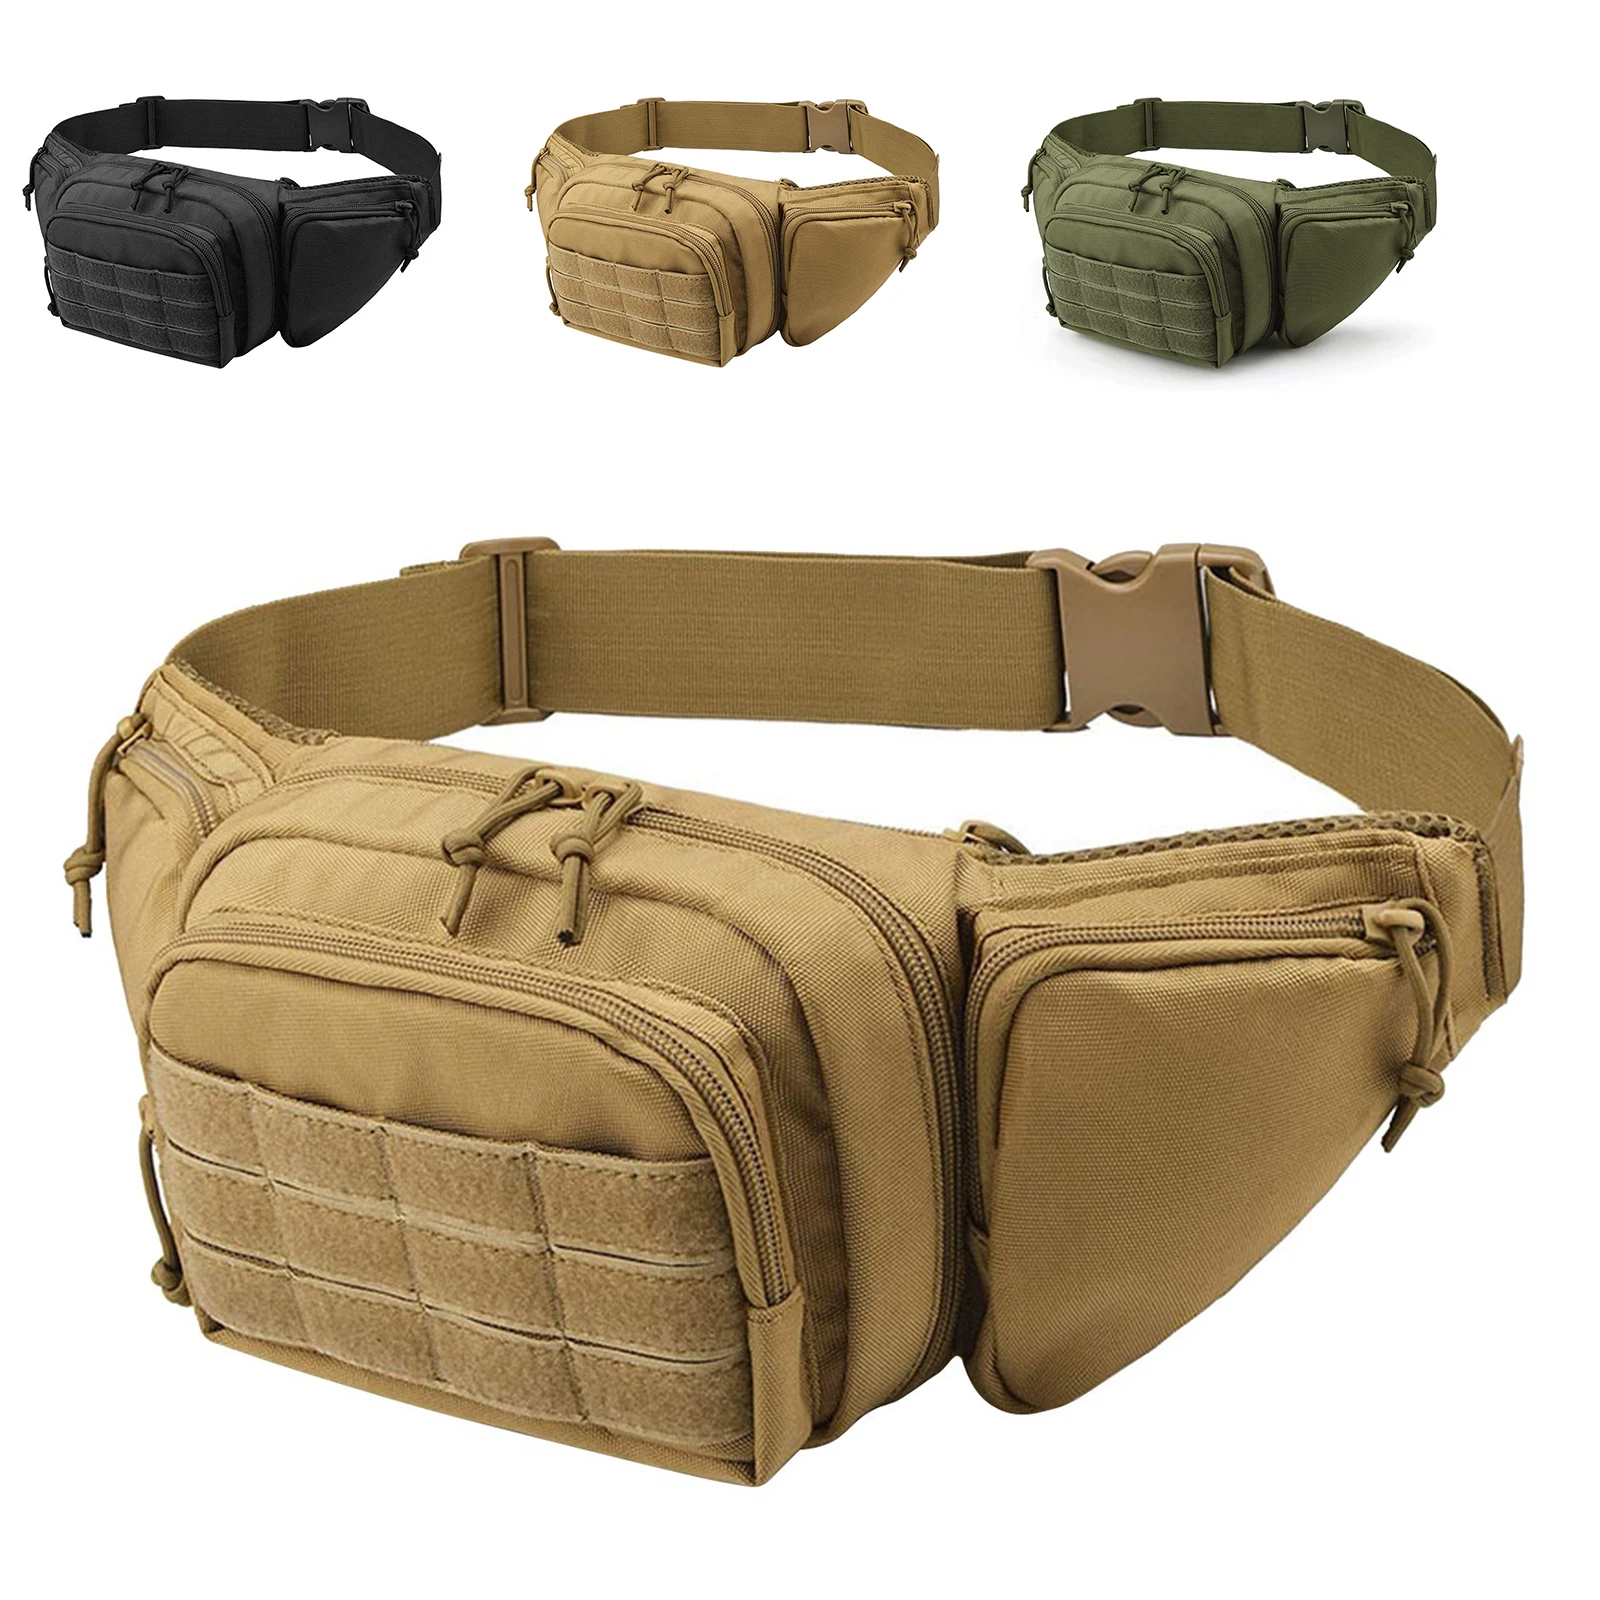 Multifunction Tactical Gun Case Concealed Pistol Pouch Waist Bags in 3 Colors 